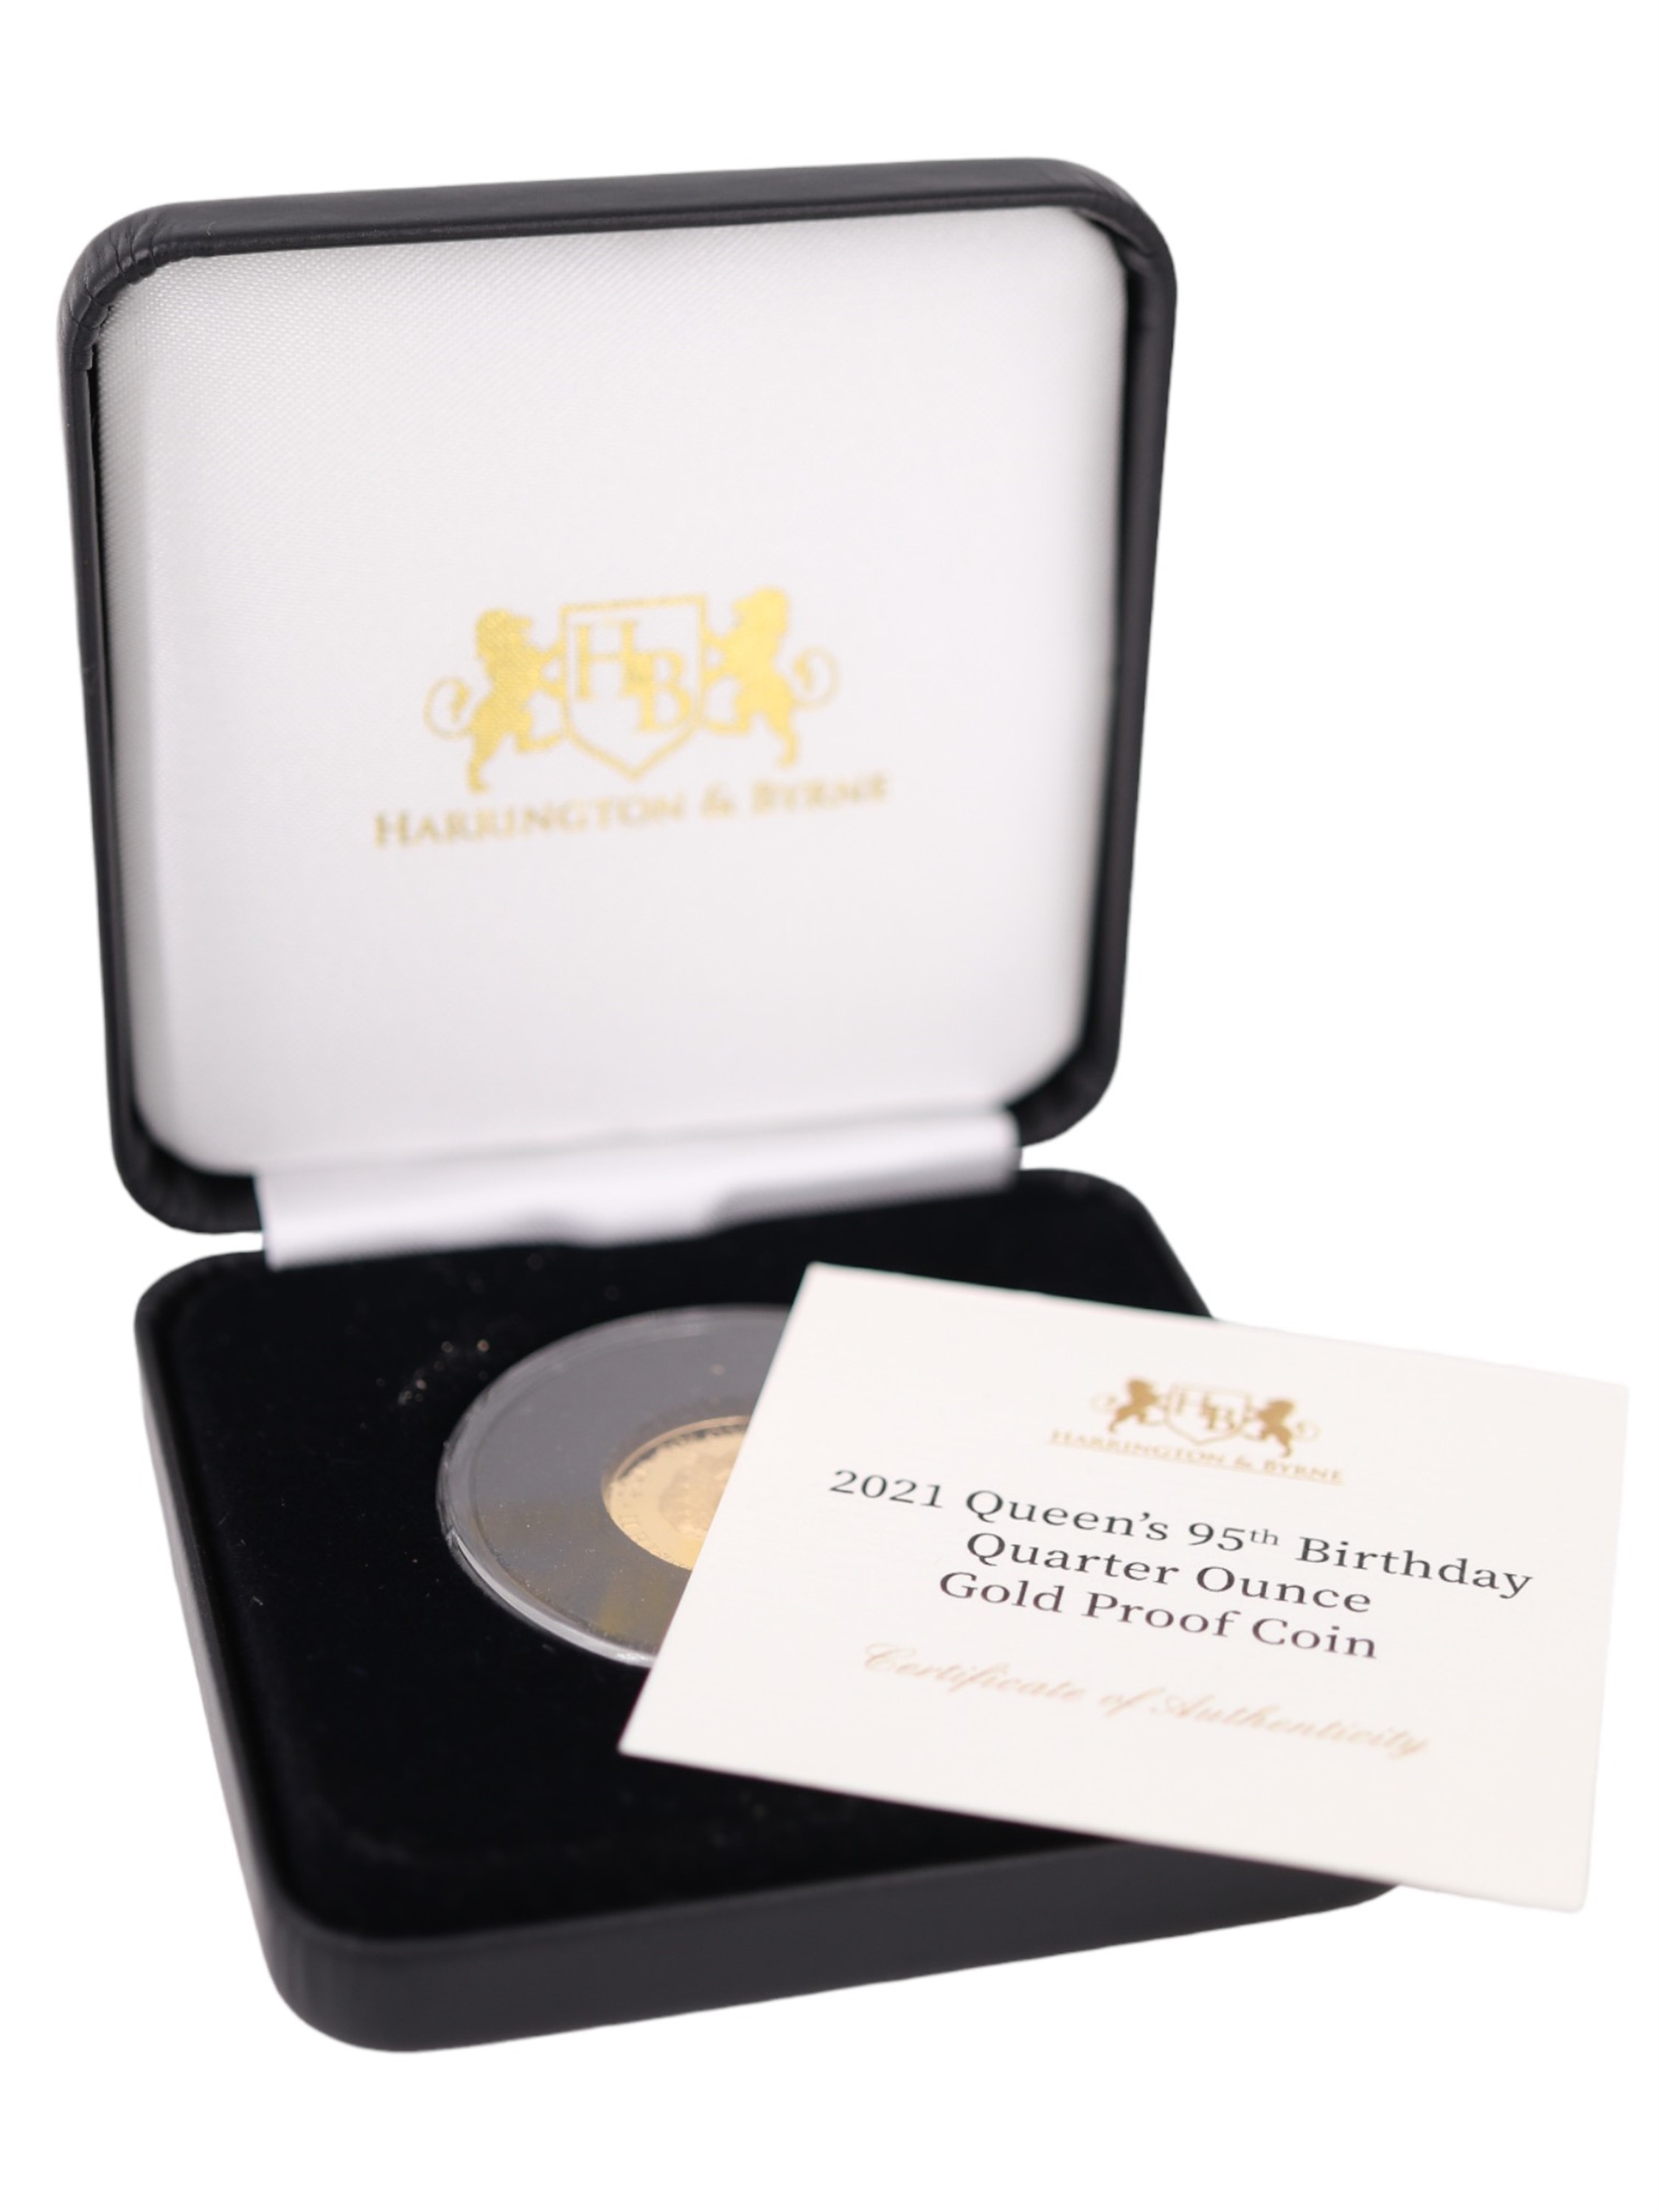 A cased 2021 Queen Elizabeth II commemorative proof gold coin, 8 g - Image 3 of 4